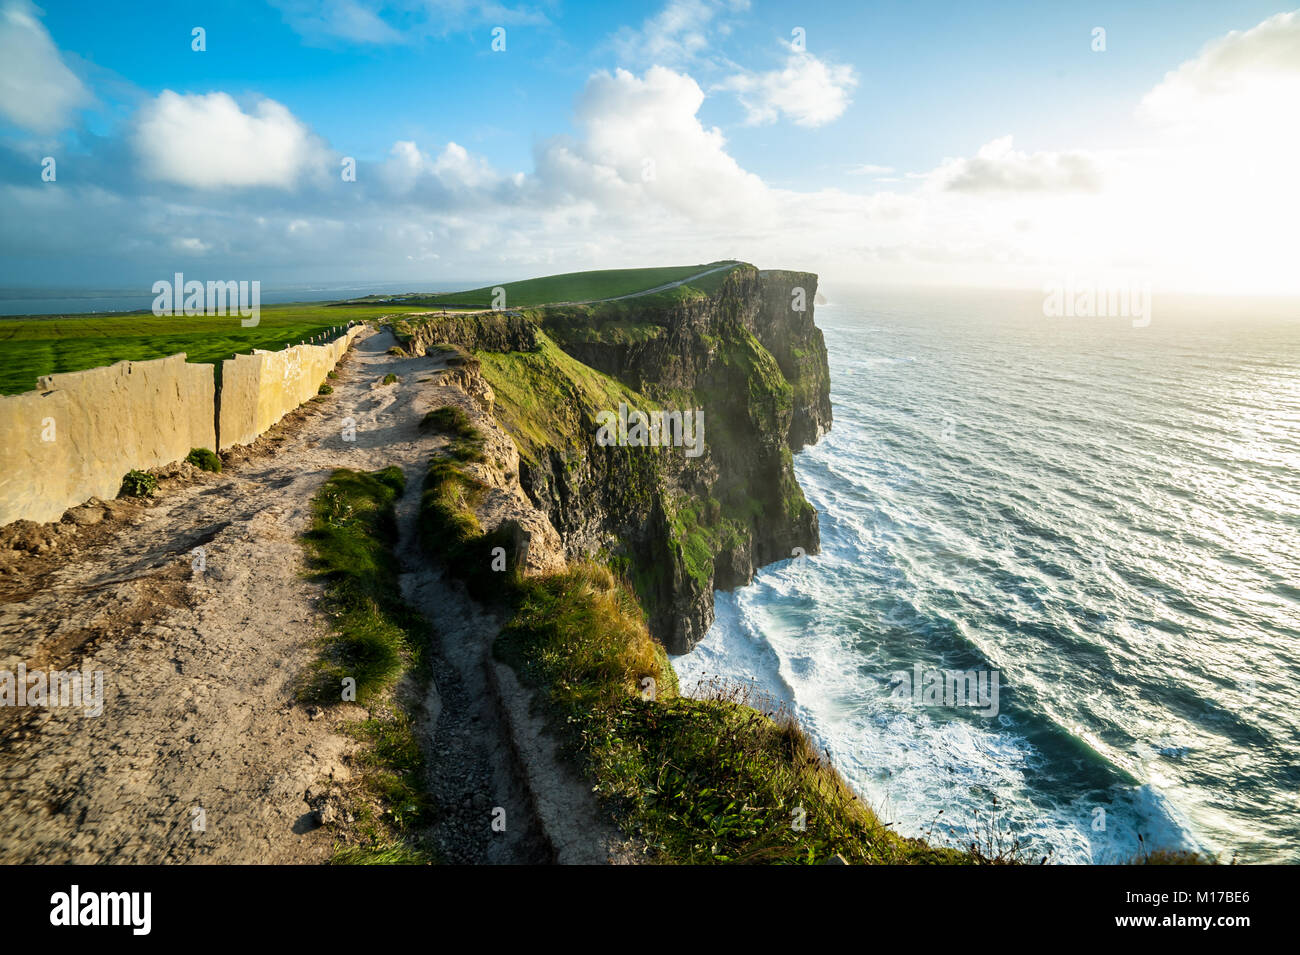 Coastal footpath walk on the Cliffs of Moher, Irelands Most Visited Natural Tourist Attraction, are sea cliffs located at the southwestern edge of the Stock Photo